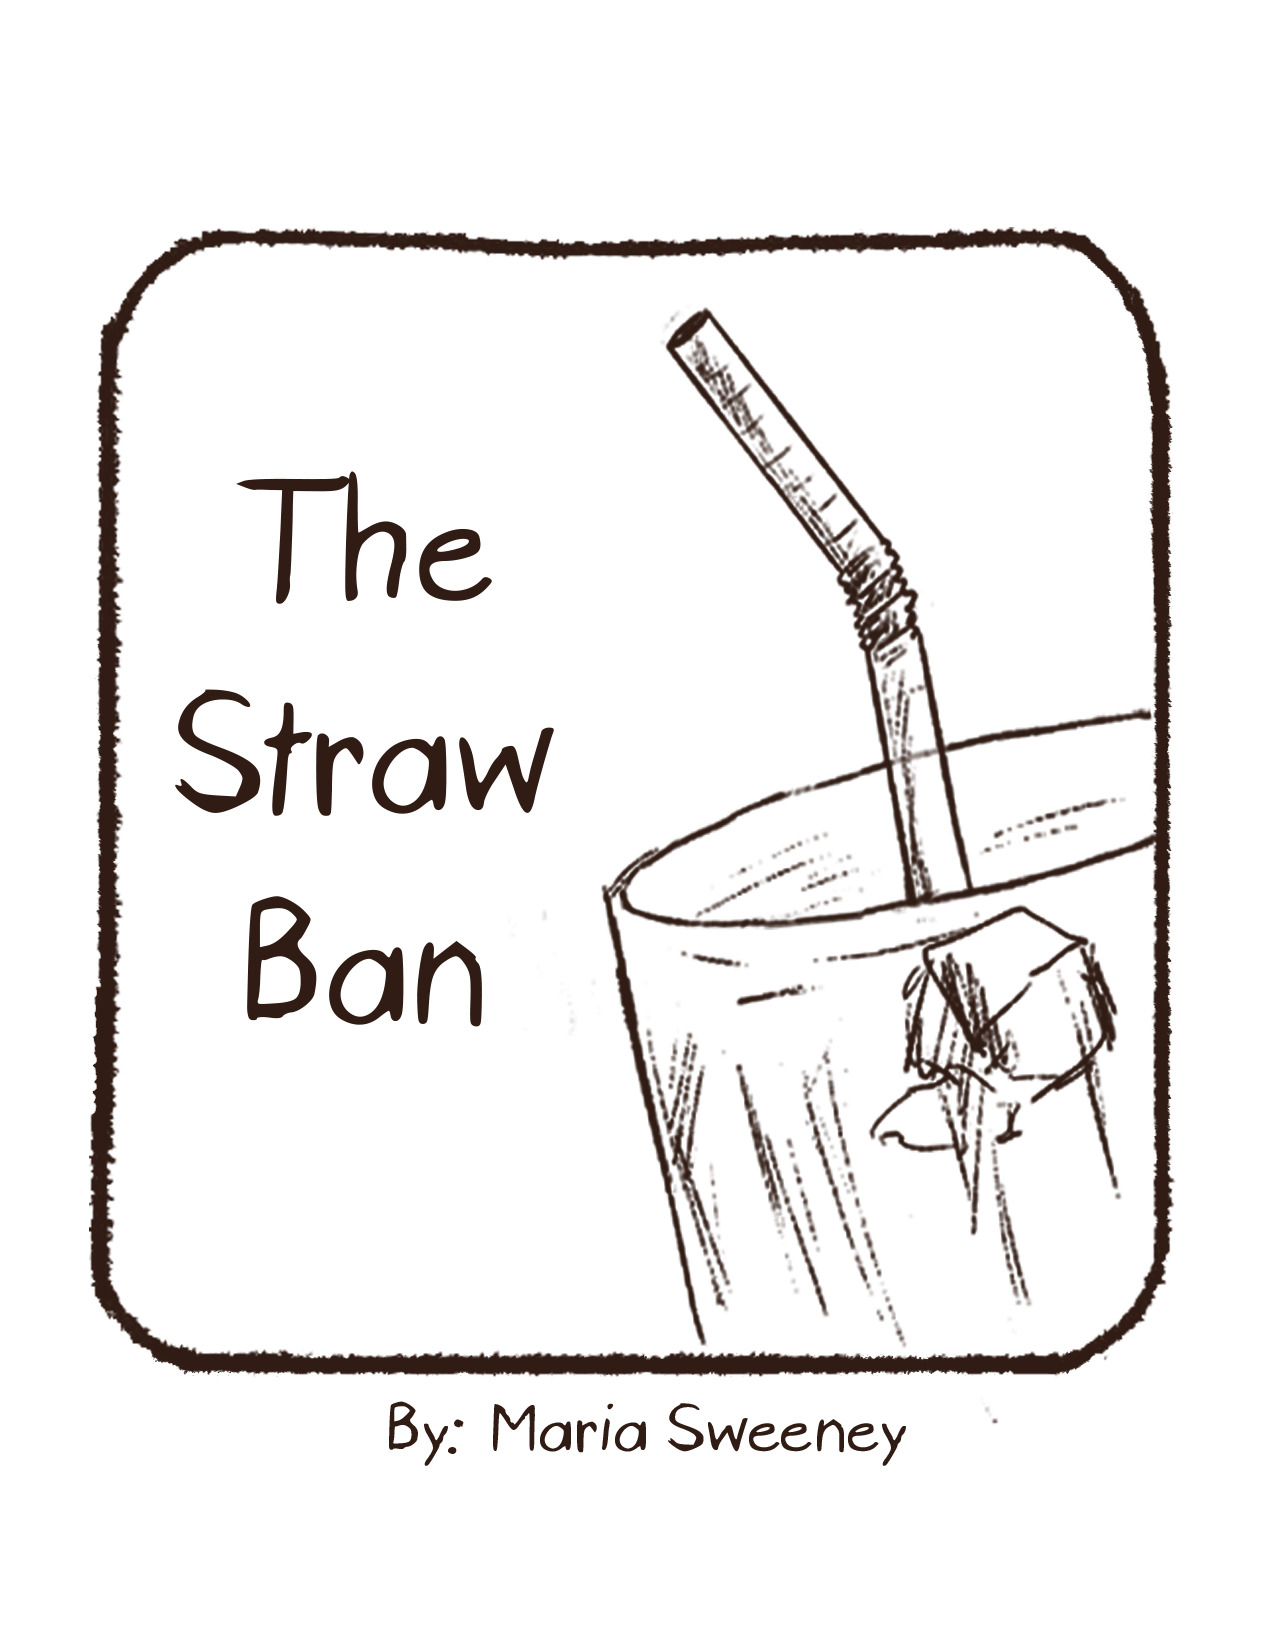 THE STRAW BAN by Maria Sweeney
https://inarutcomics.bigcartel.com/product/the-straw-ban
The Straw Ban is an educational mini-zine about the ableism behind the ban of plastic straws throughout cities in the United States, and how it negatively effects...